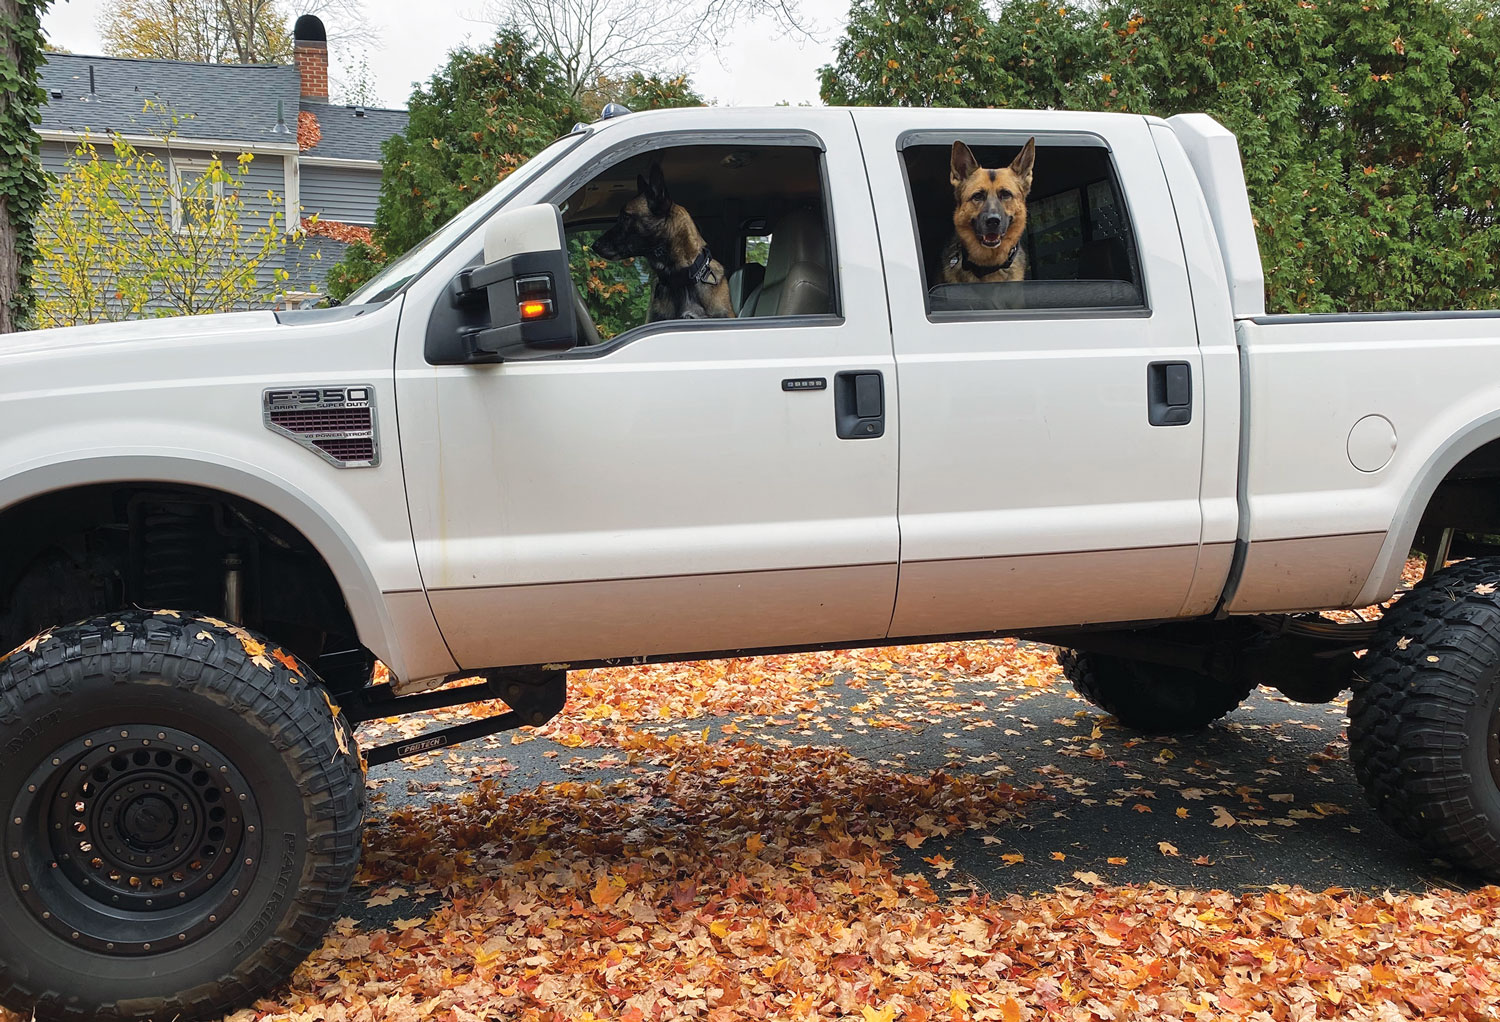 Courtney Craven’s F350 and her dogs inside